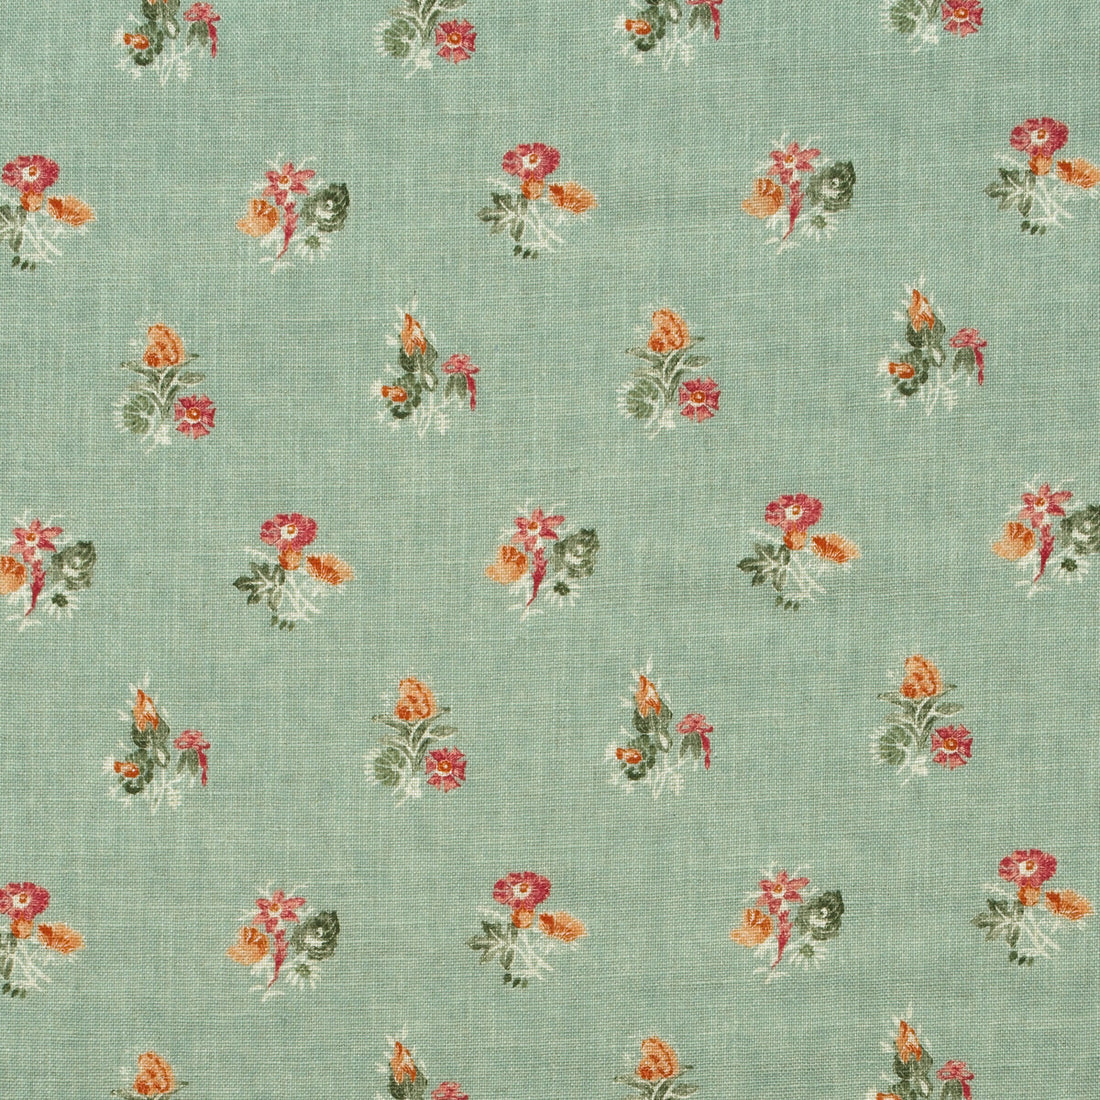 Spinney fabric in duck egg color - pattern AM100410.512.0 - by Kravet Couture in the Andrew Martin The Secret Garden collection